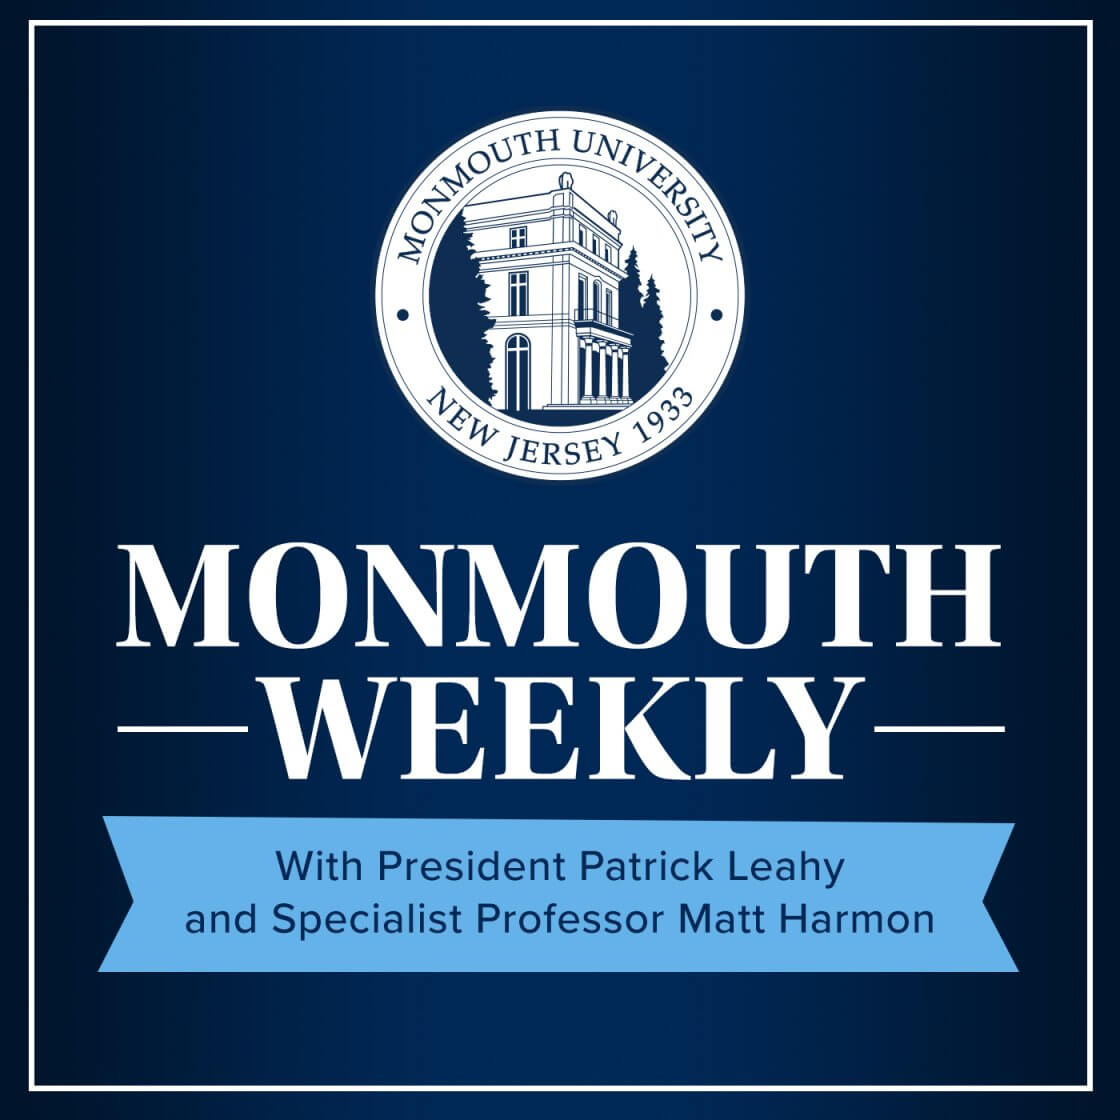 Monmouth Weekly Podcast: Episode 46